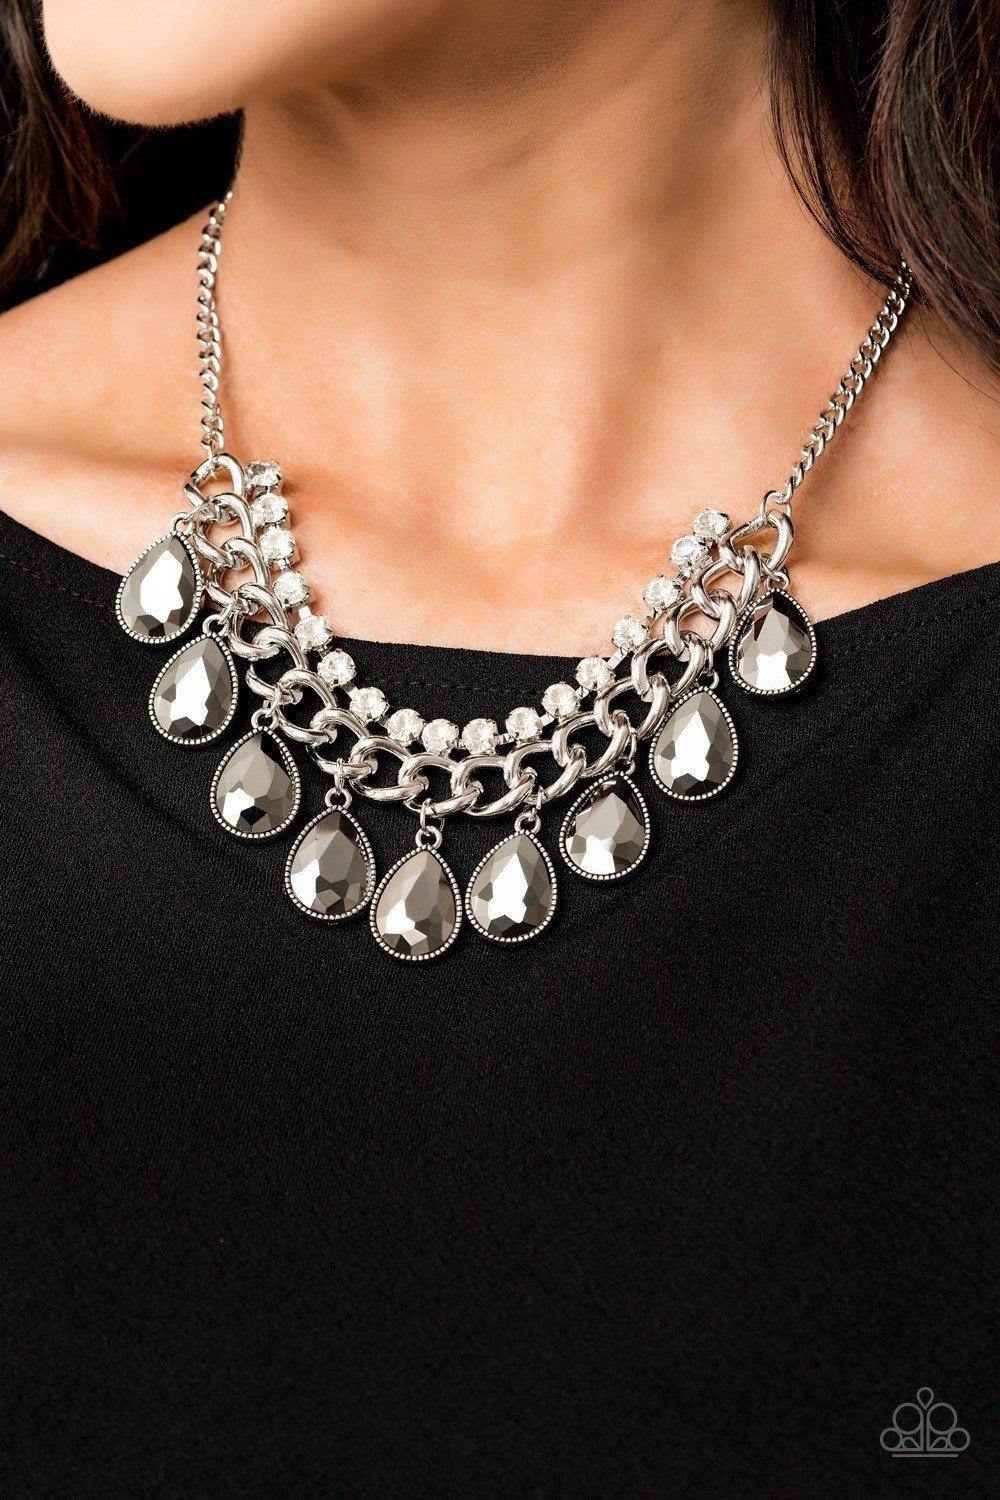 All Toget-HEIR now Silver Teardrop Necklace - Paparazzi Accessories-CarasShop.com - $5 Jewelry by Cara Jewels